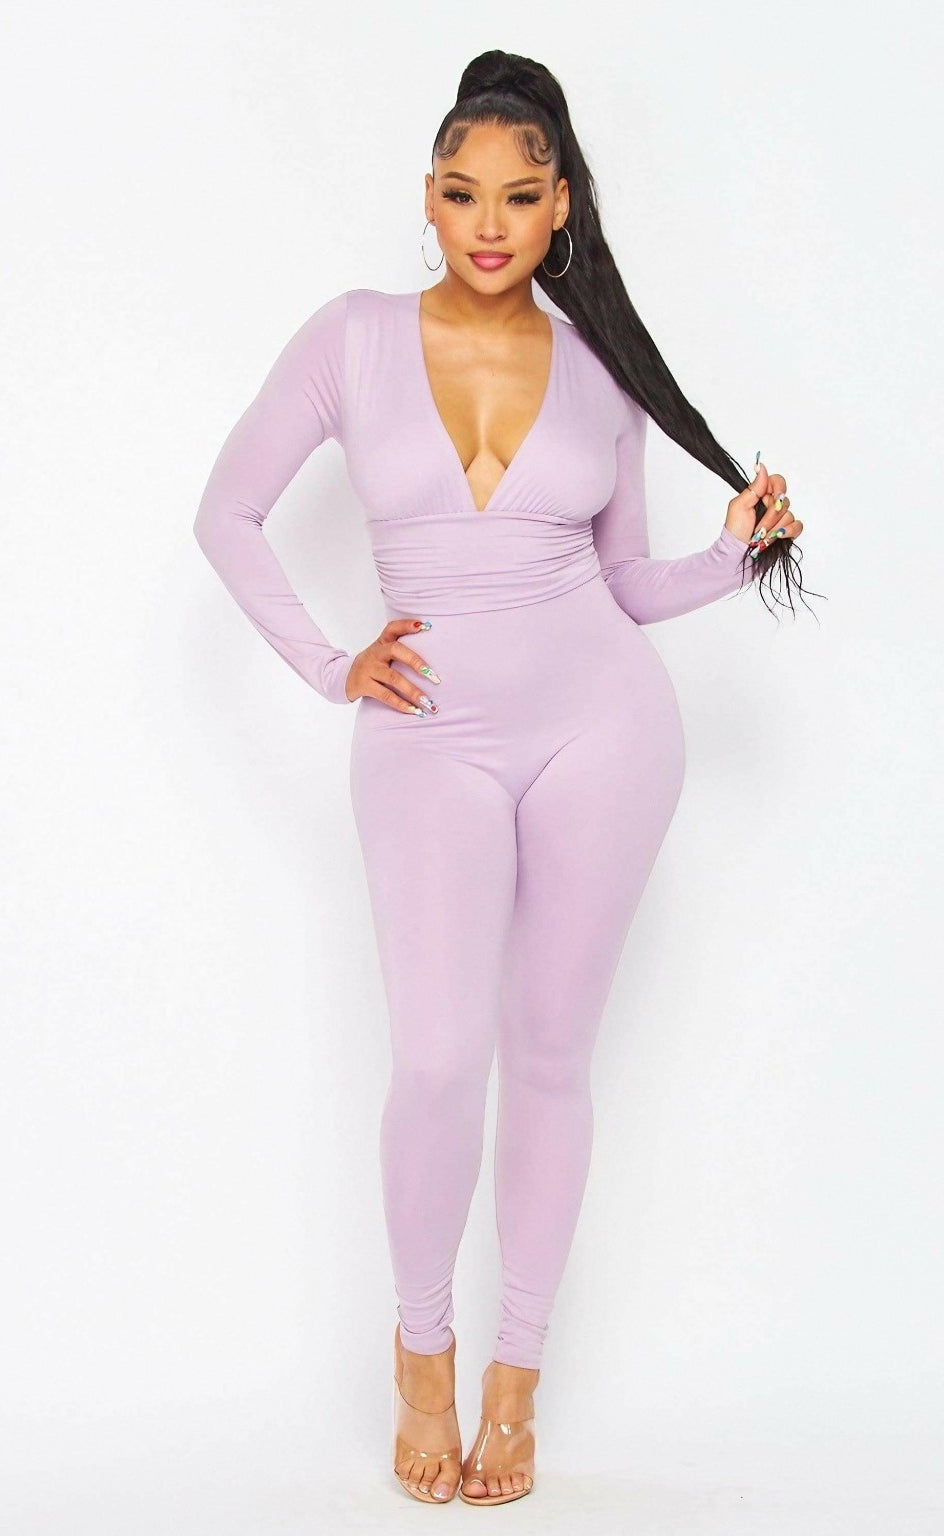 Epicplacess jumpsuits SMALL / Lilac / UNITED STATES Brushed AirEssentials Mock Jumpsuits XJ1024